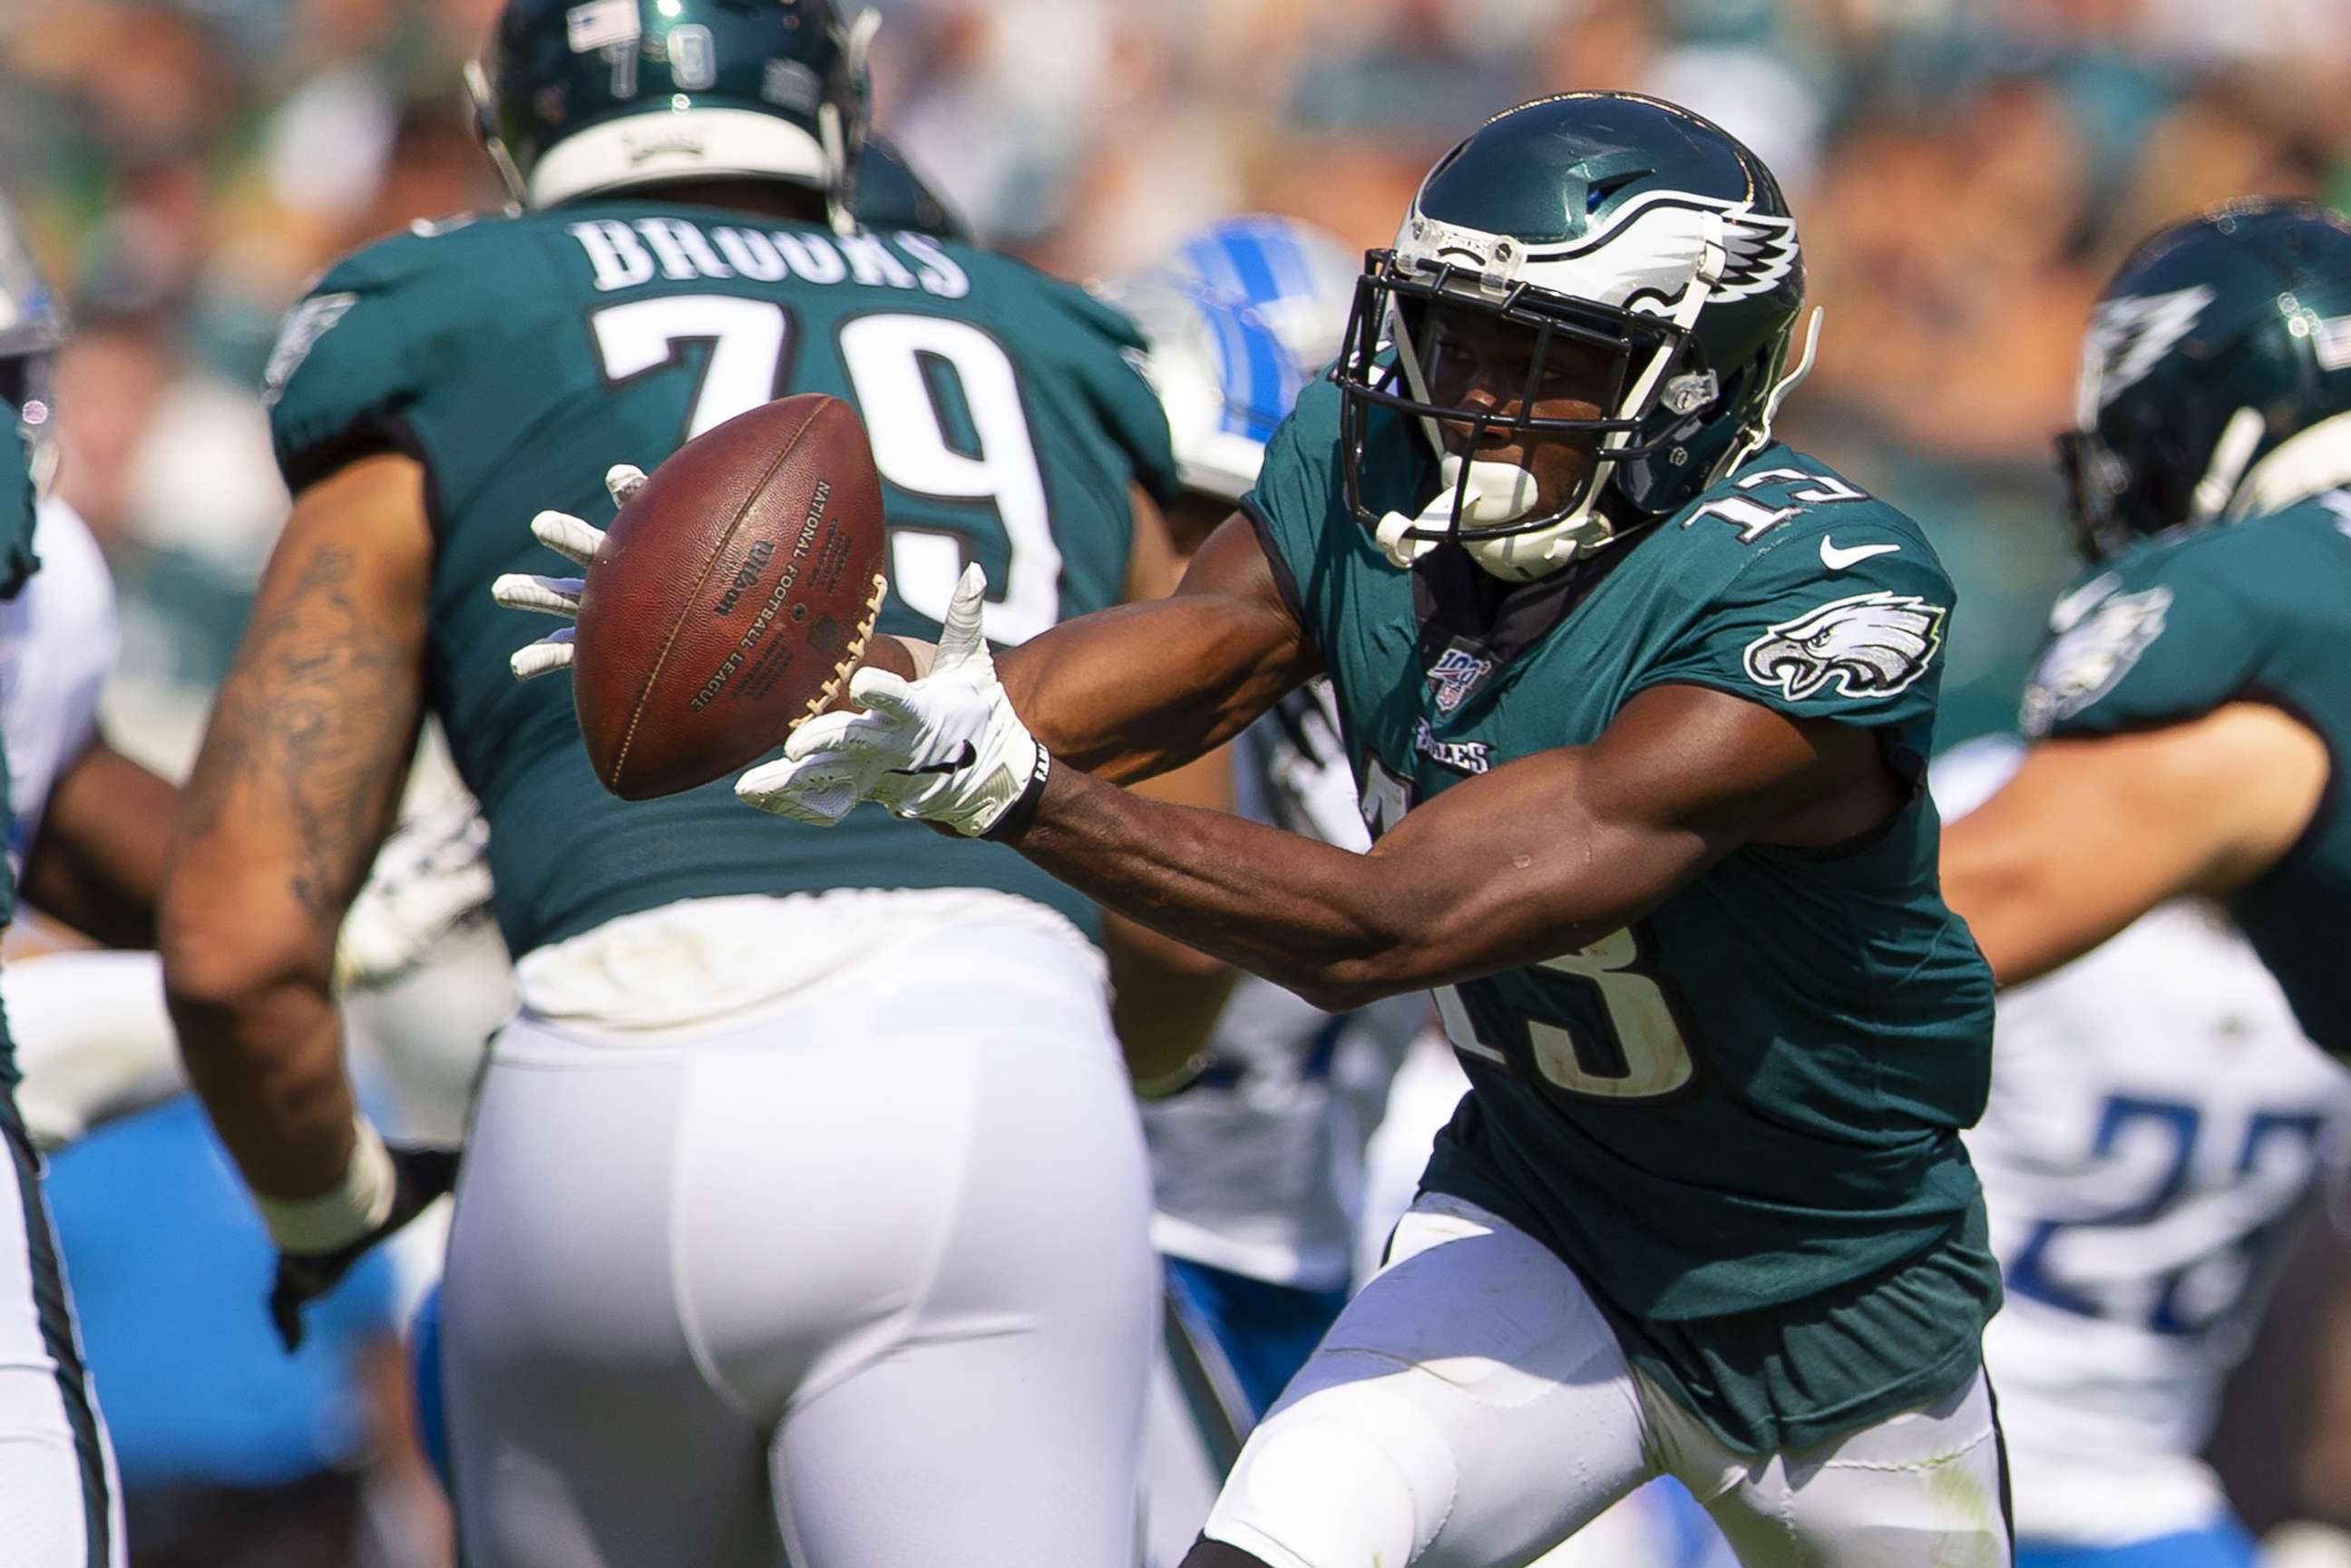 PHOTO: Nelson Agholor #13 of the Philadelphia Eagles catches the ball in the third quarter against the Detroit Lions at Lincoln Financial Field on September 22, 2019, in Philadelphia.